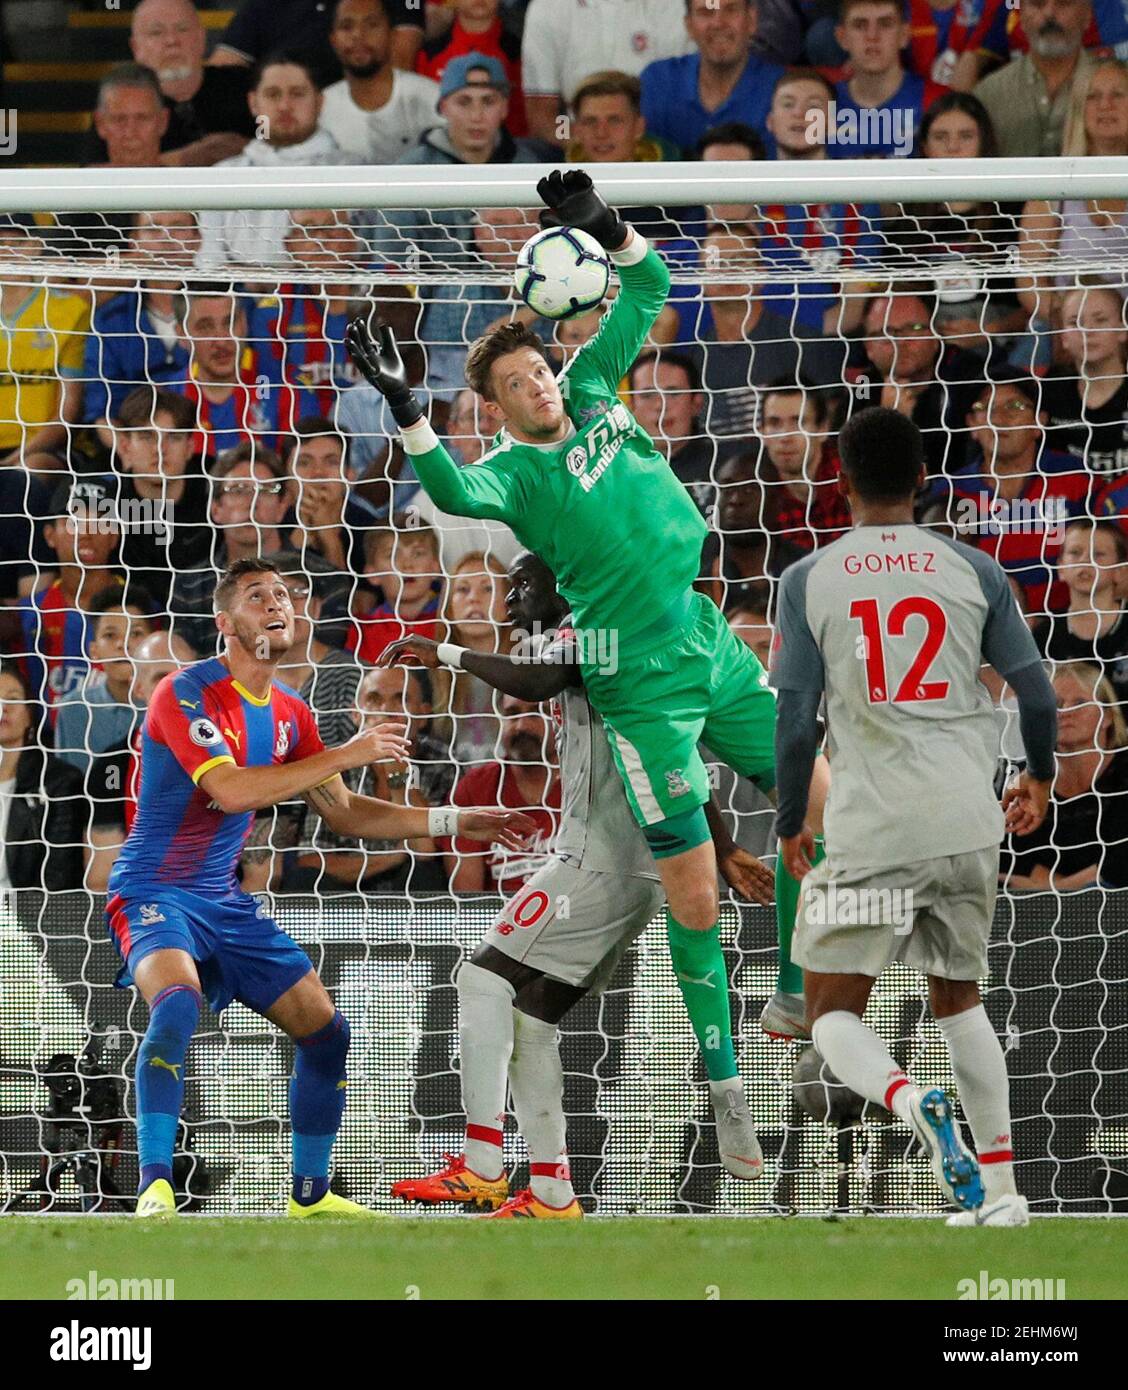 Soccer Football - Premier League - Crystal Palace v Liverpool - Selhurst Park, London, Britain - August 20, 2018  Crystal Palace's Wayne Hennessey in action                         Action Images via Reuters/John Sibley  EDITORIAL USE ONLY. No use with unauthorized audio, video, data, fixture lists, club/league logos or 'live' services. Online in-match use limited to 75 images, no video emulation. No use in betting, games or single club/league/player publications.  Please contact your account representative for further details. Stock Photo